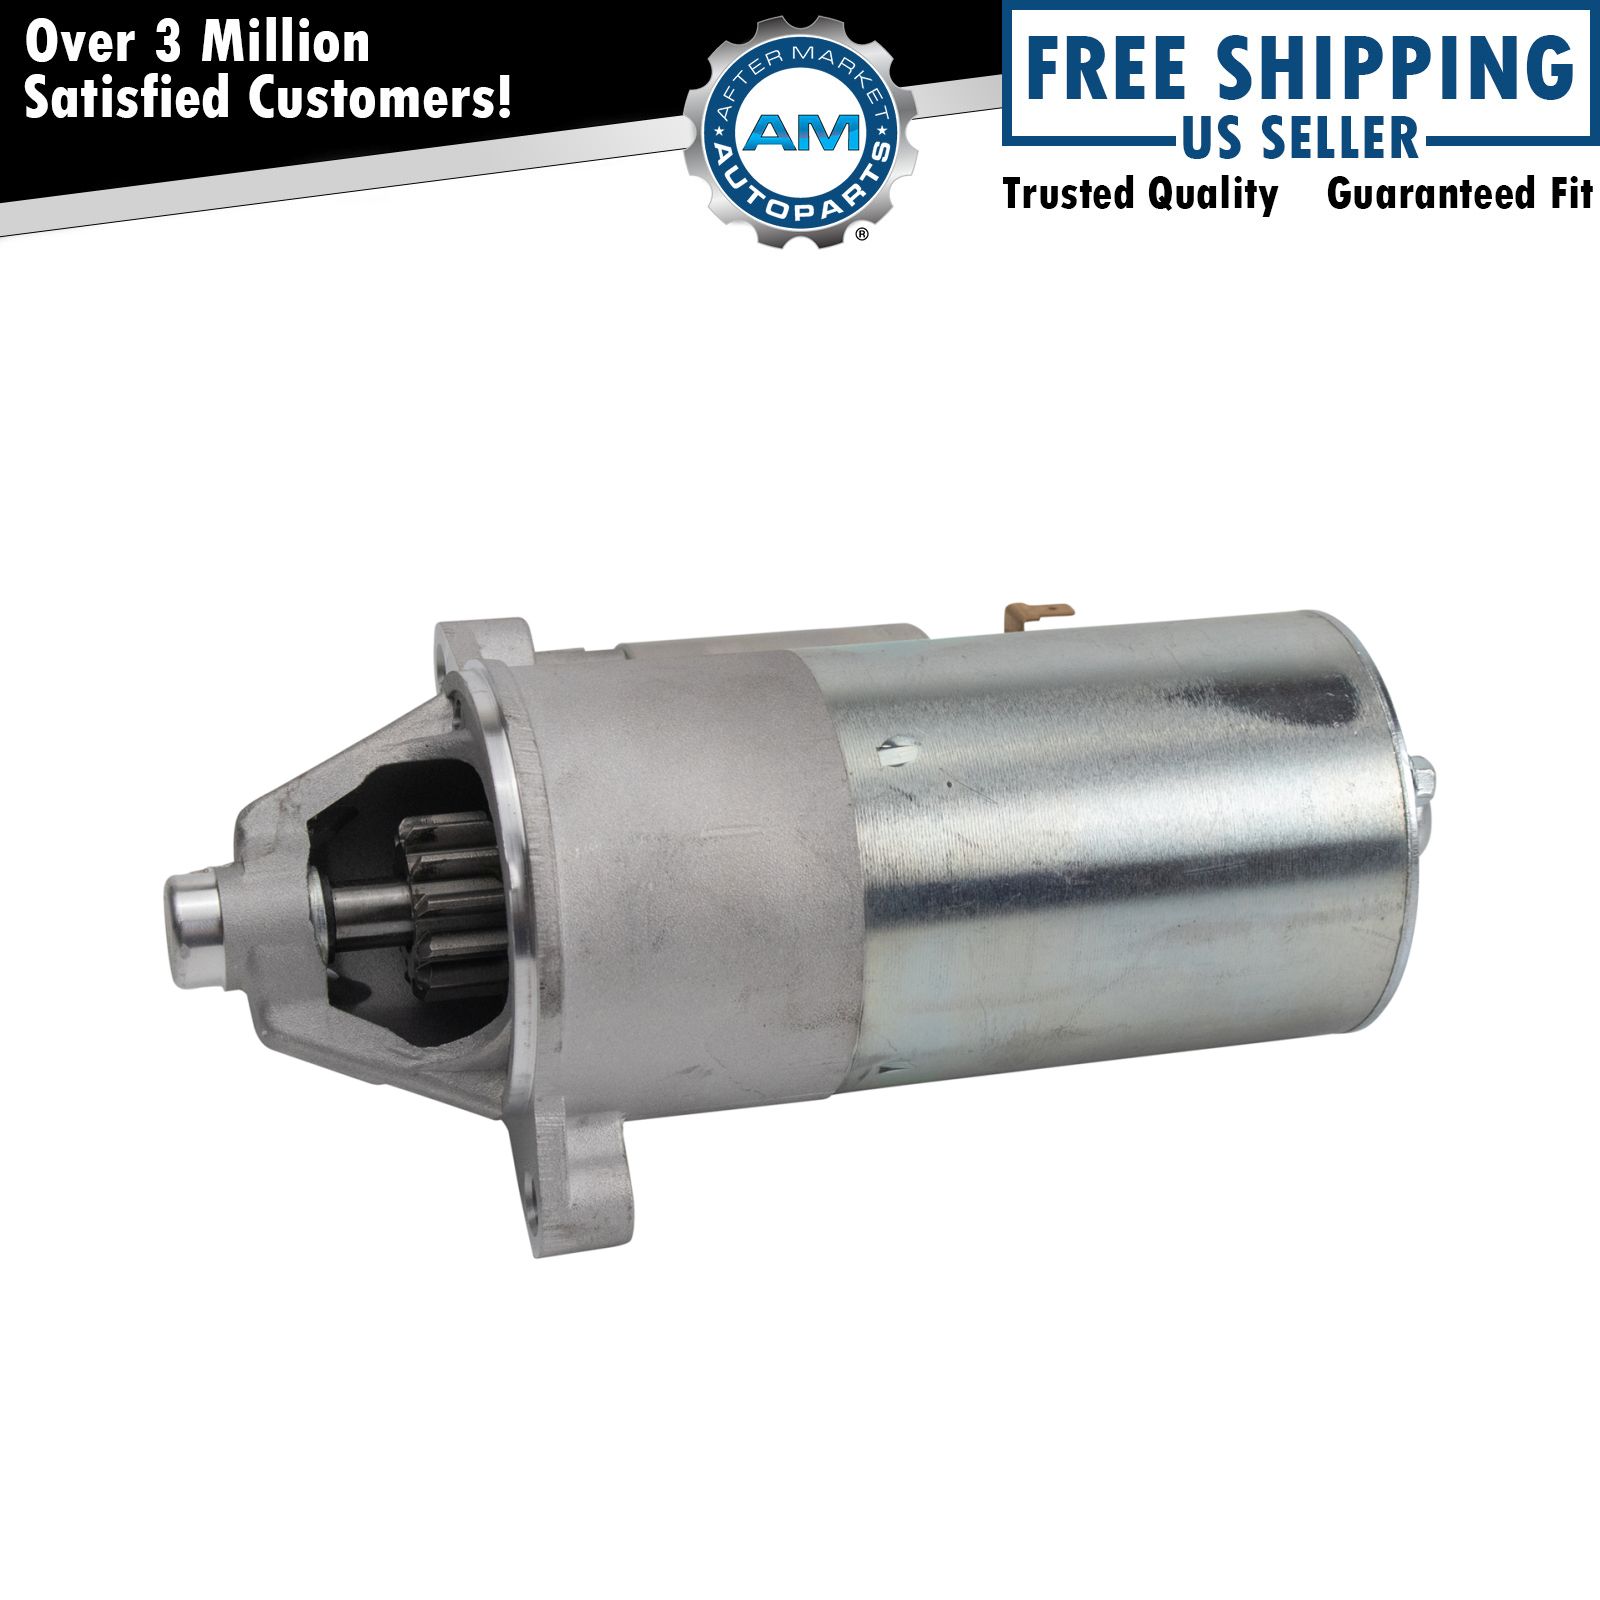 New Starter Motor for Crown Vic E150 Van Expedition F150 F250 Mustang Cougar